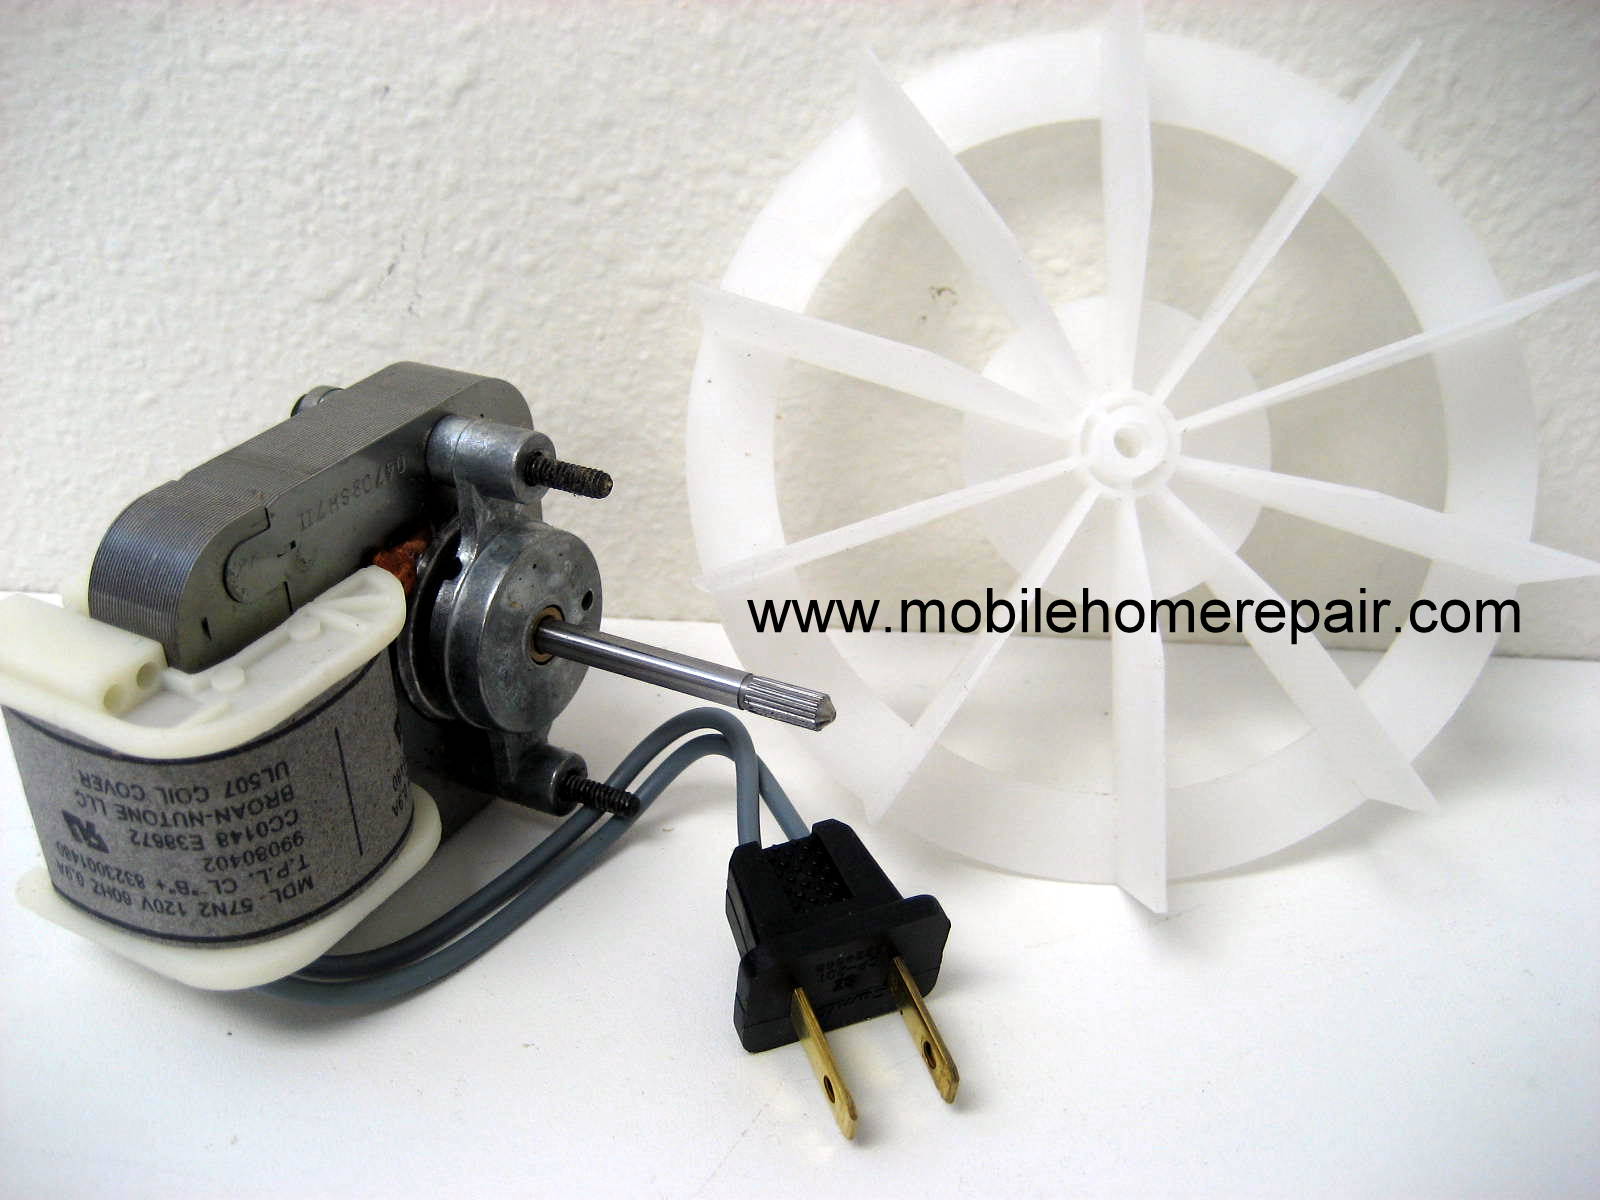 REPLACING A DEAD MOTOR IN BATHROOM FAN - WELCOME TO THE HOME DEPOT